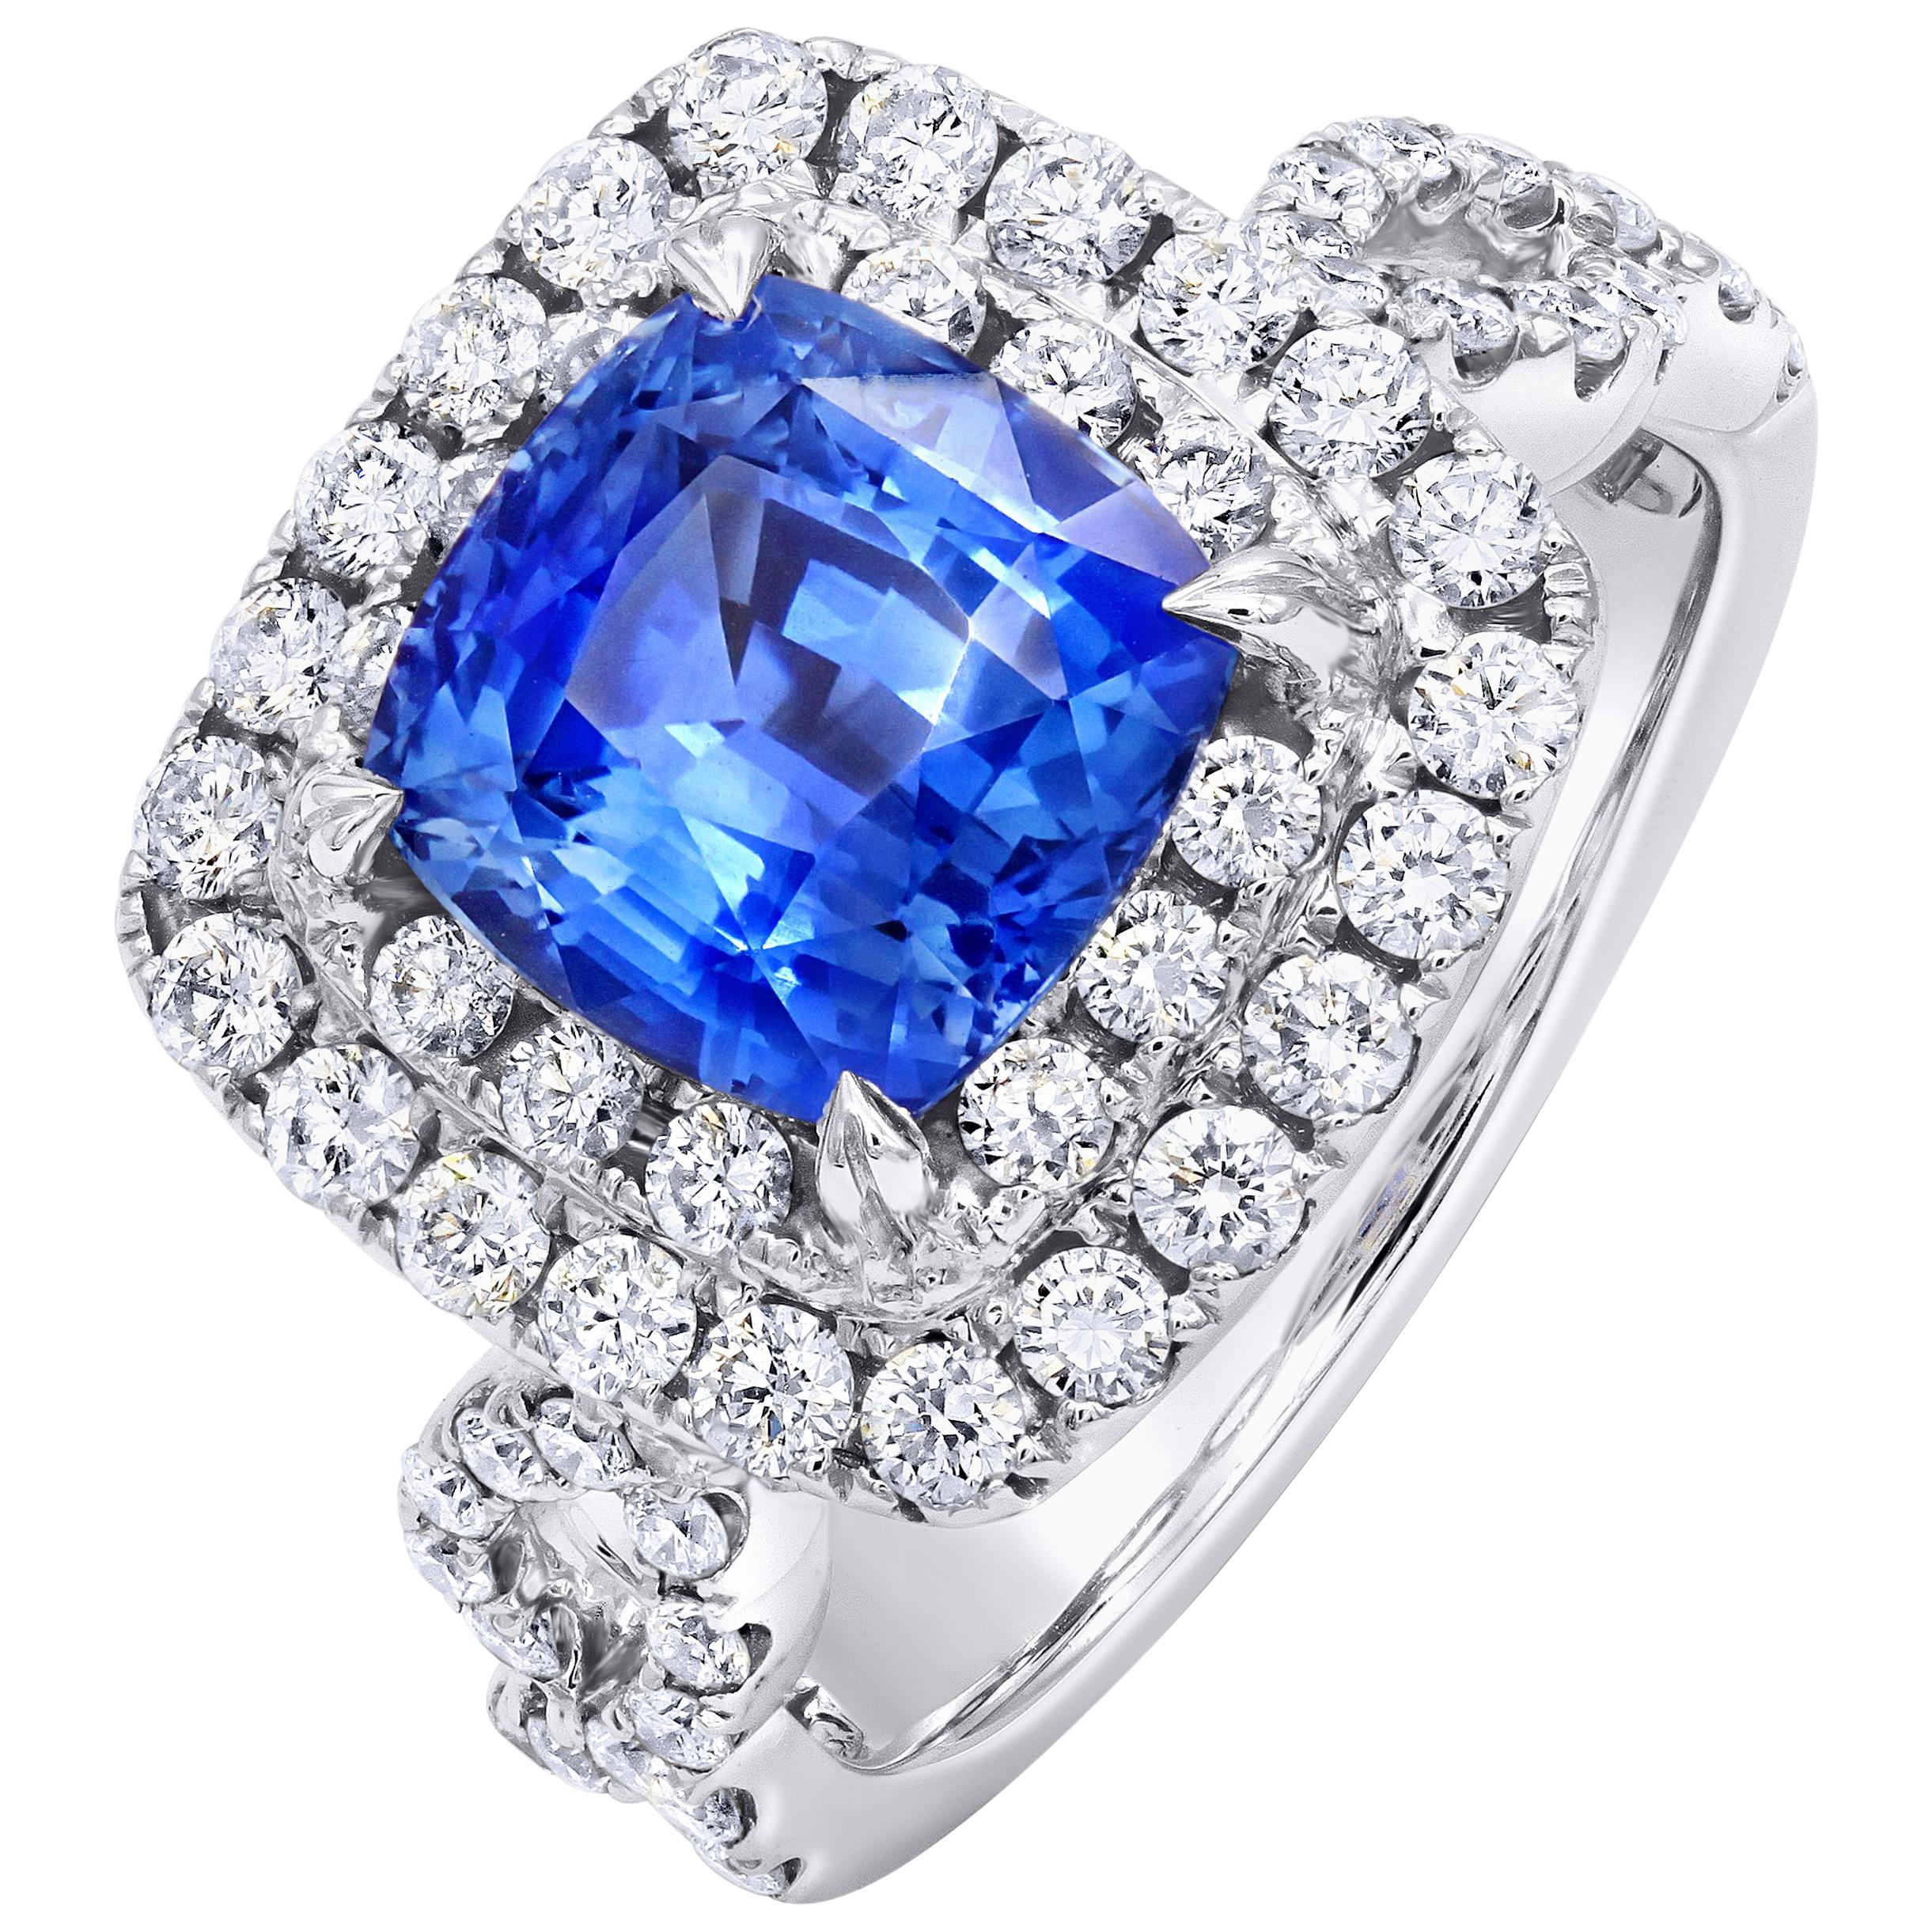 3.47 Carat Blue Sapphire and Diamond Ring For Sale